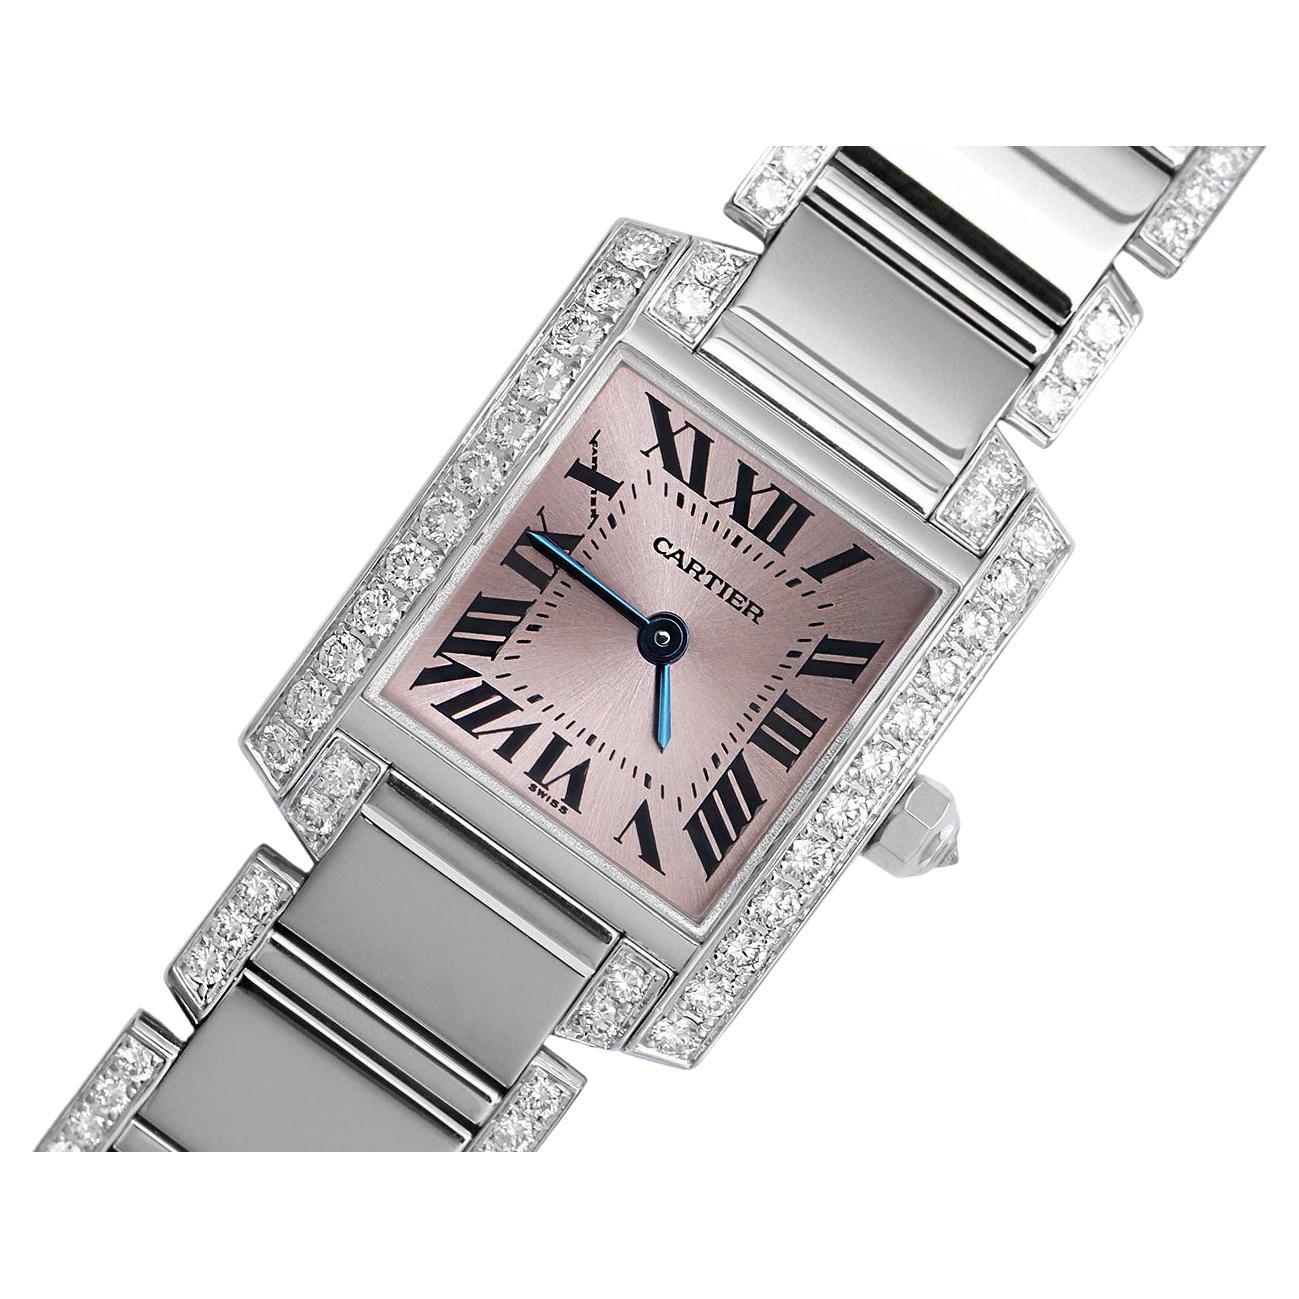 Cartier Tank Francaise Ladies 18k White Gold Watch with Factory Diamonds